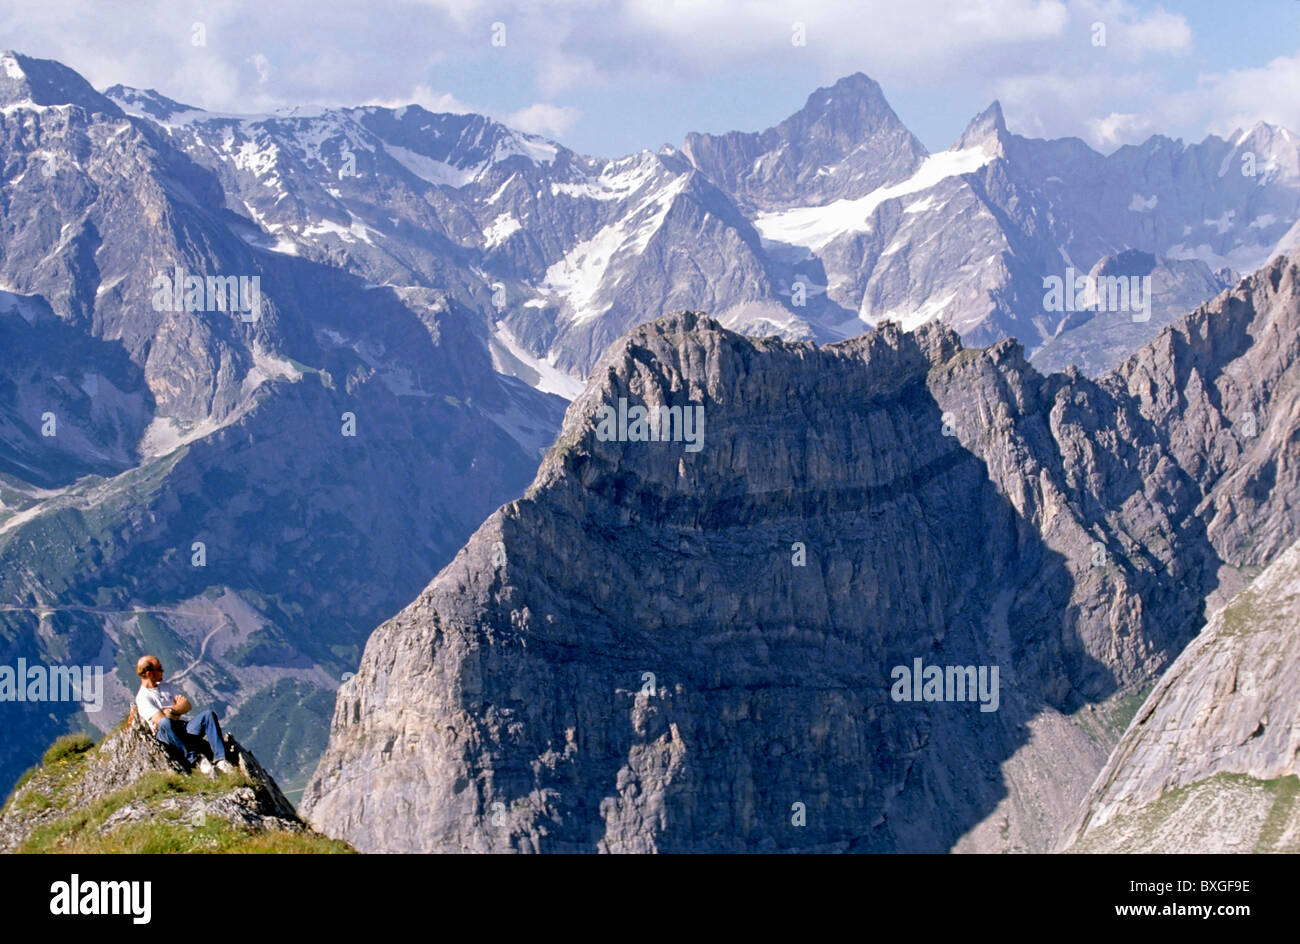 French Alps - Hiker looks down at the view from high up a mountain in the Vanoise National Park, France. Stock Photo